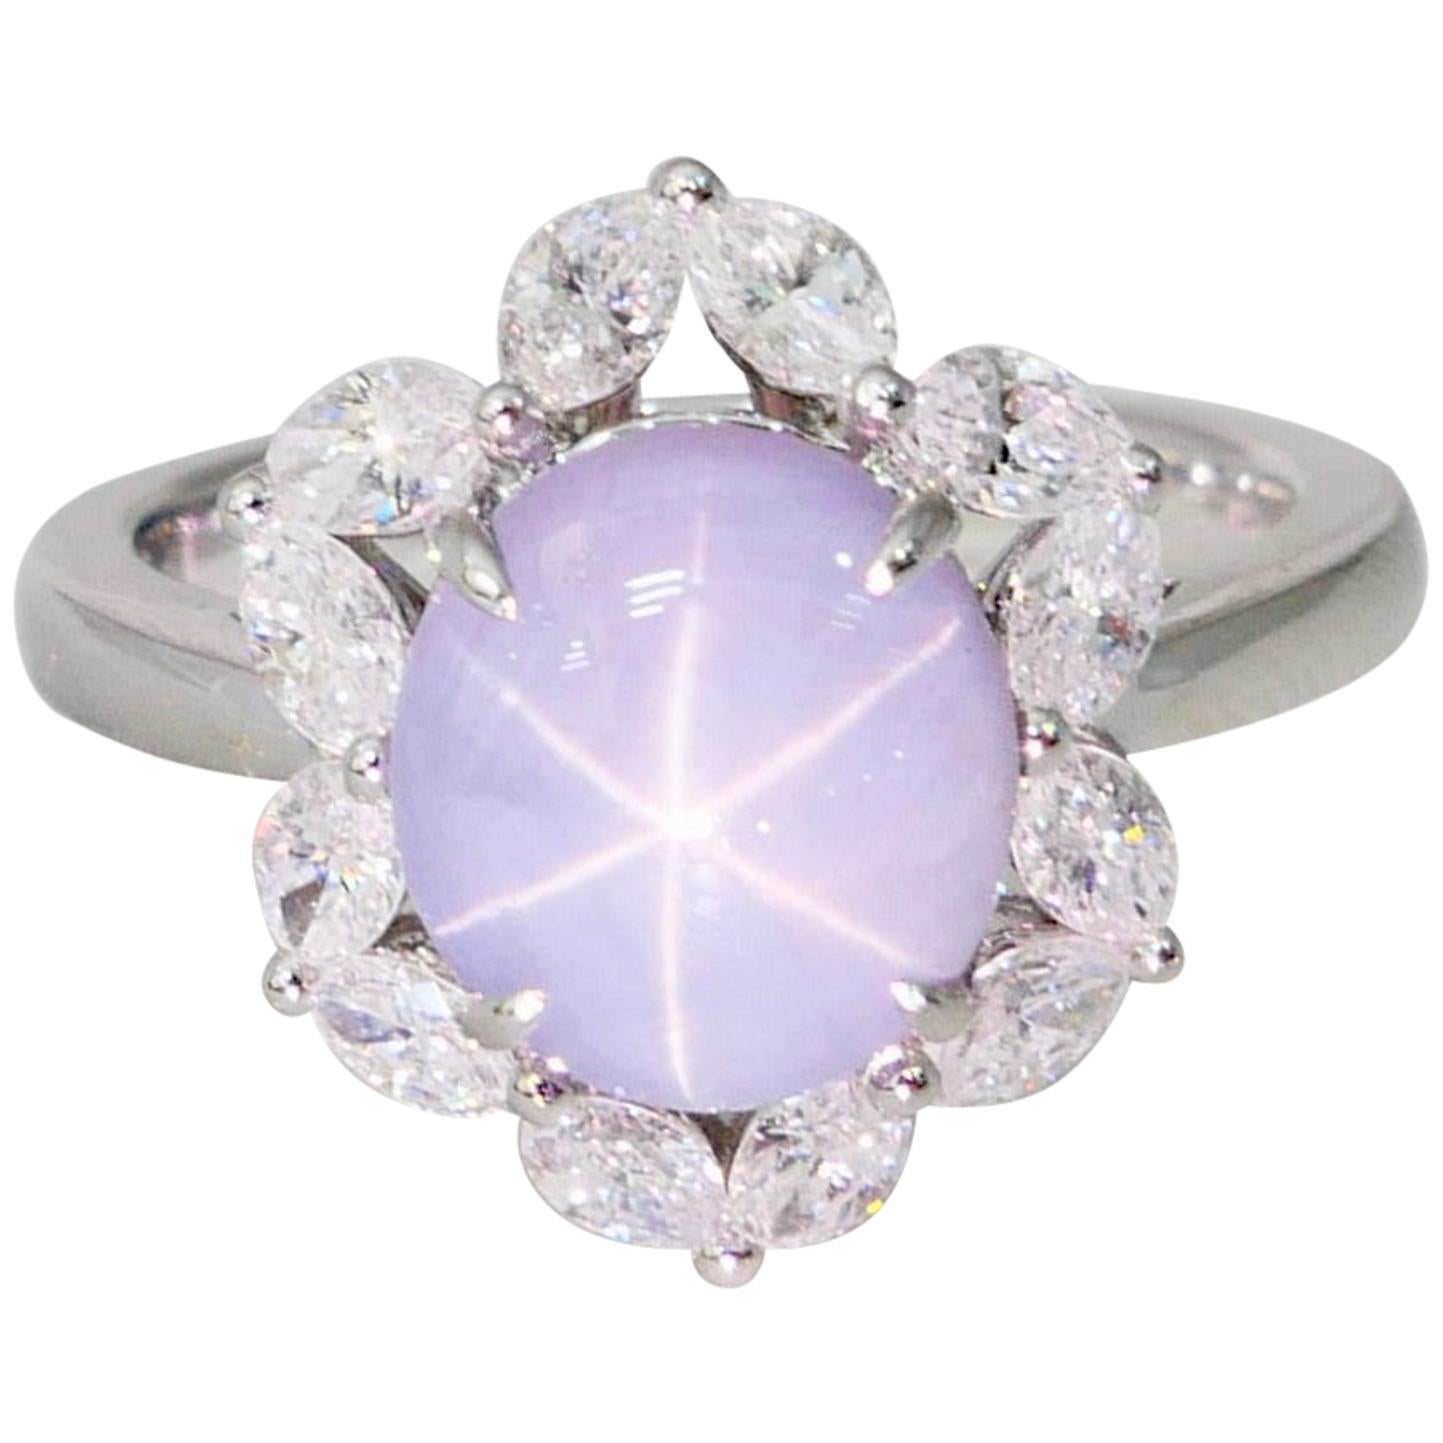 GIA Certified 3.48 Cts Natural No Heat Star Sapphire & Diamond Cocktail Ring.